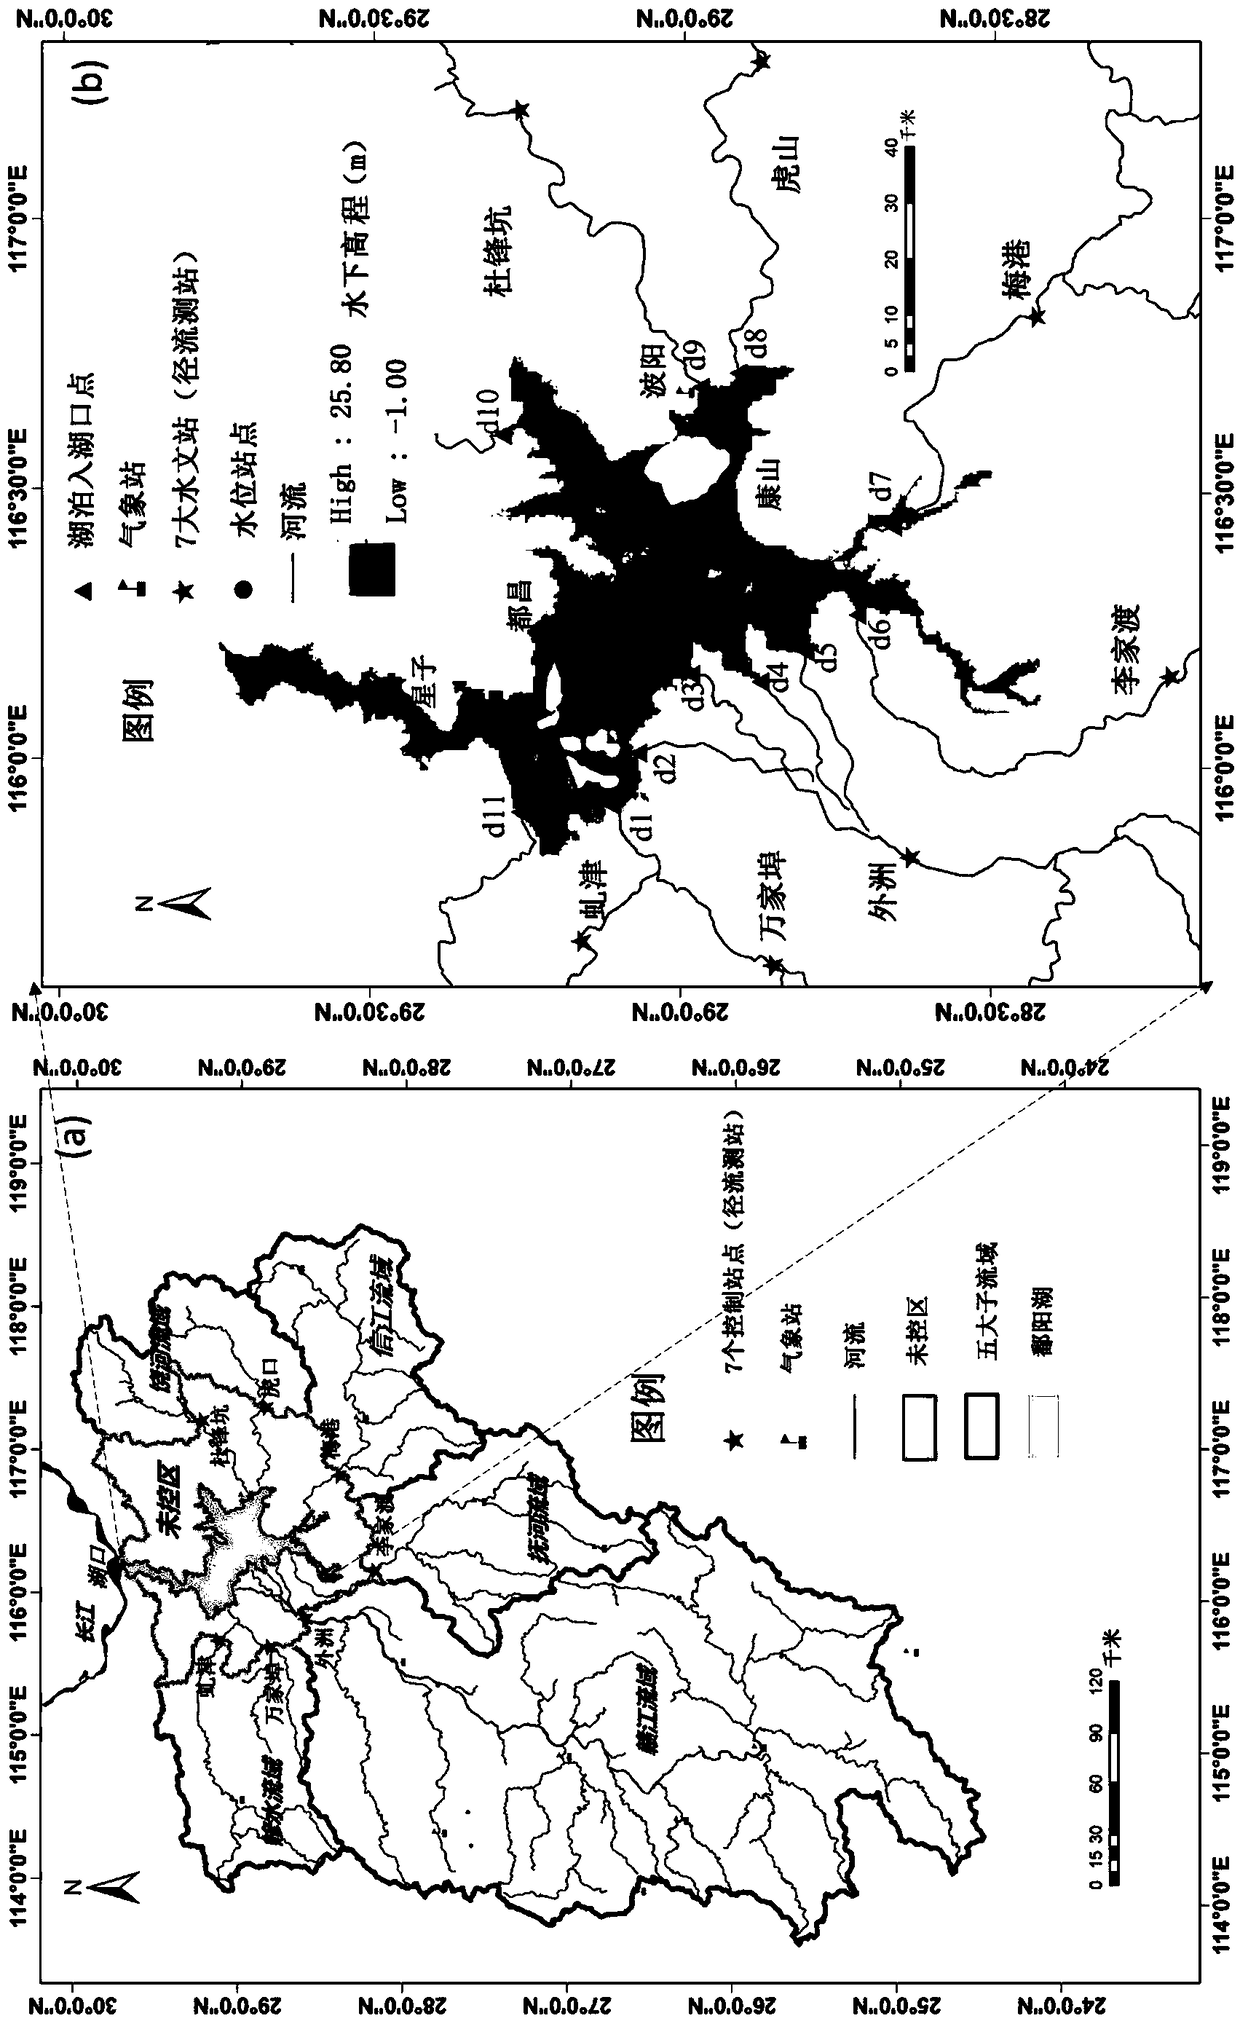 A runoff forecasting method for uncontrolled area based on the coupling of hydrological and hydrodynamic models